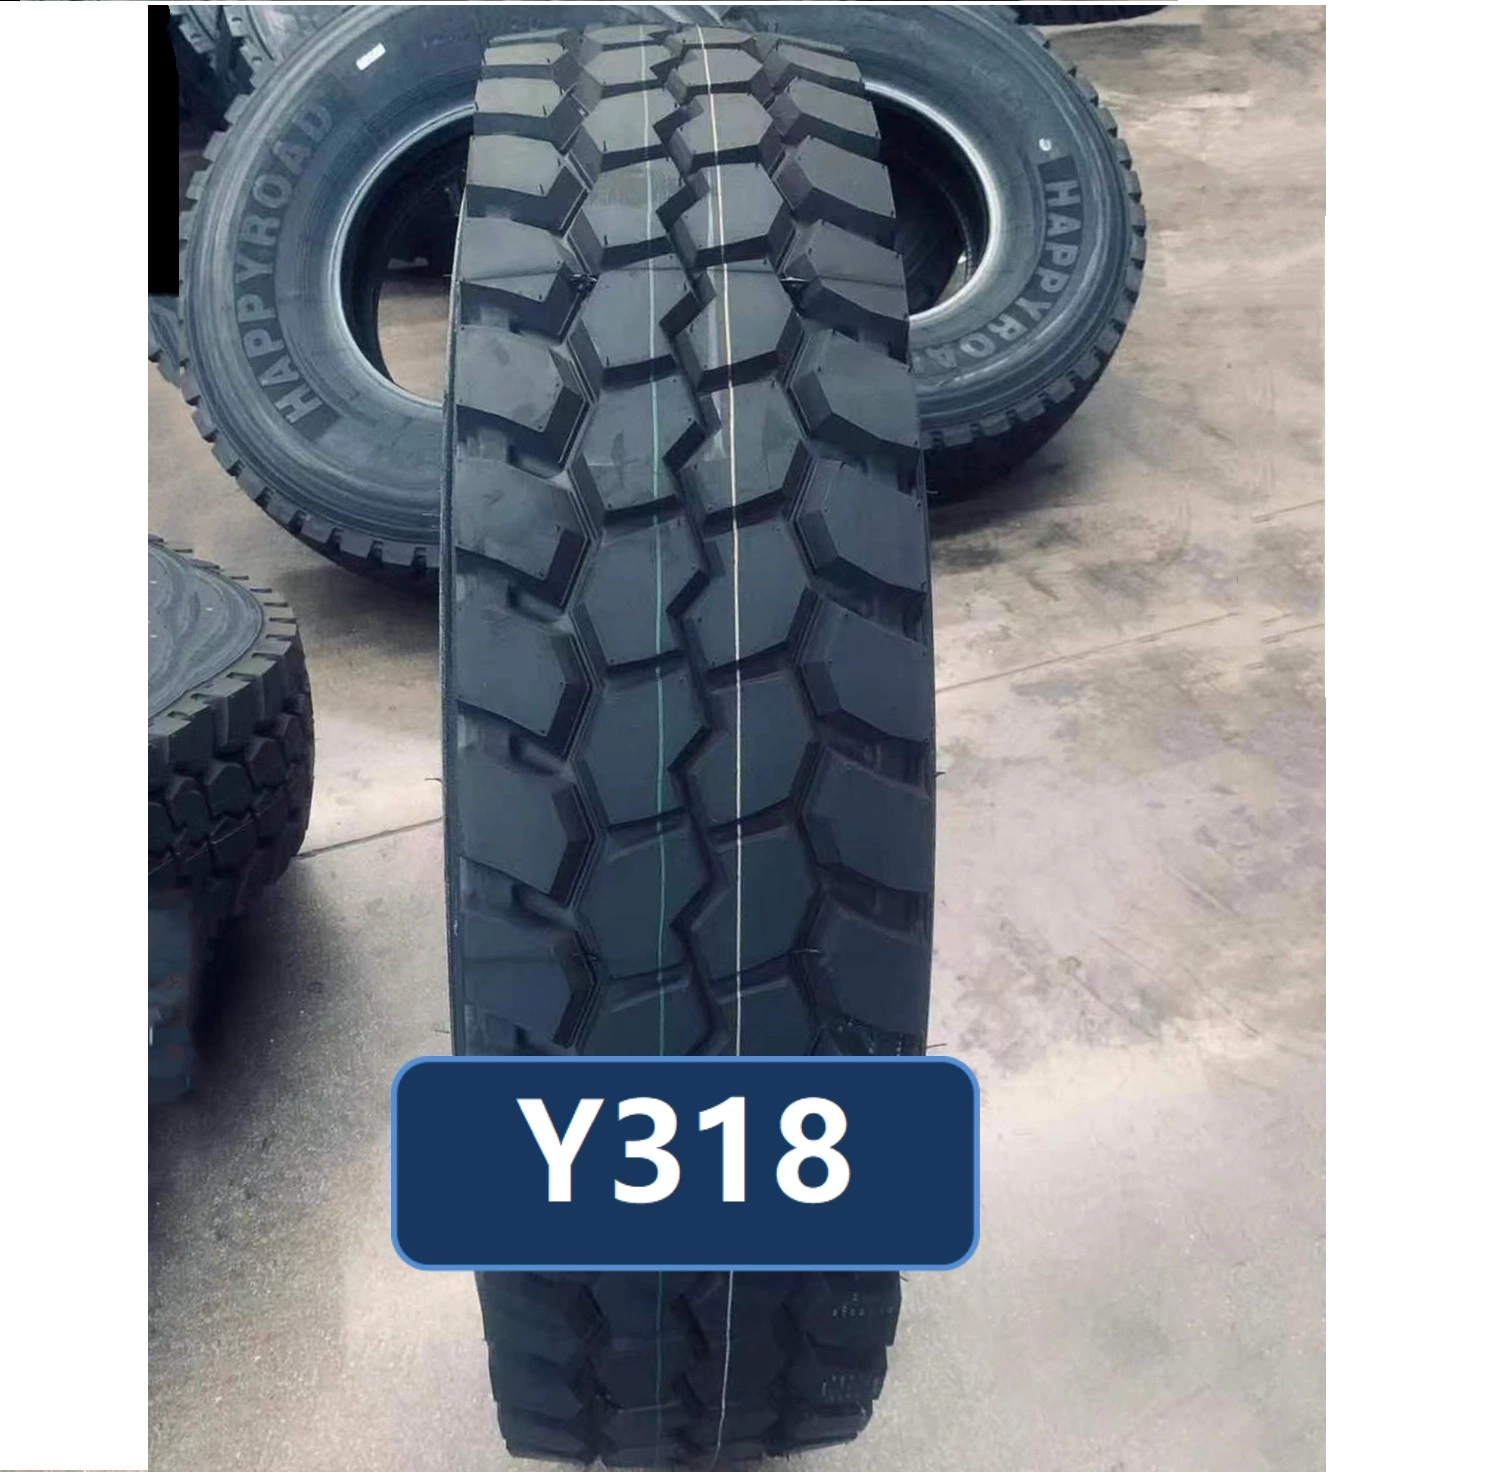 Used Semi Truck Tires Wholesale/Supplier Discount Tire Direct Tires Wheels Tire Repair & Tire Service Commercial Truck Tires Online